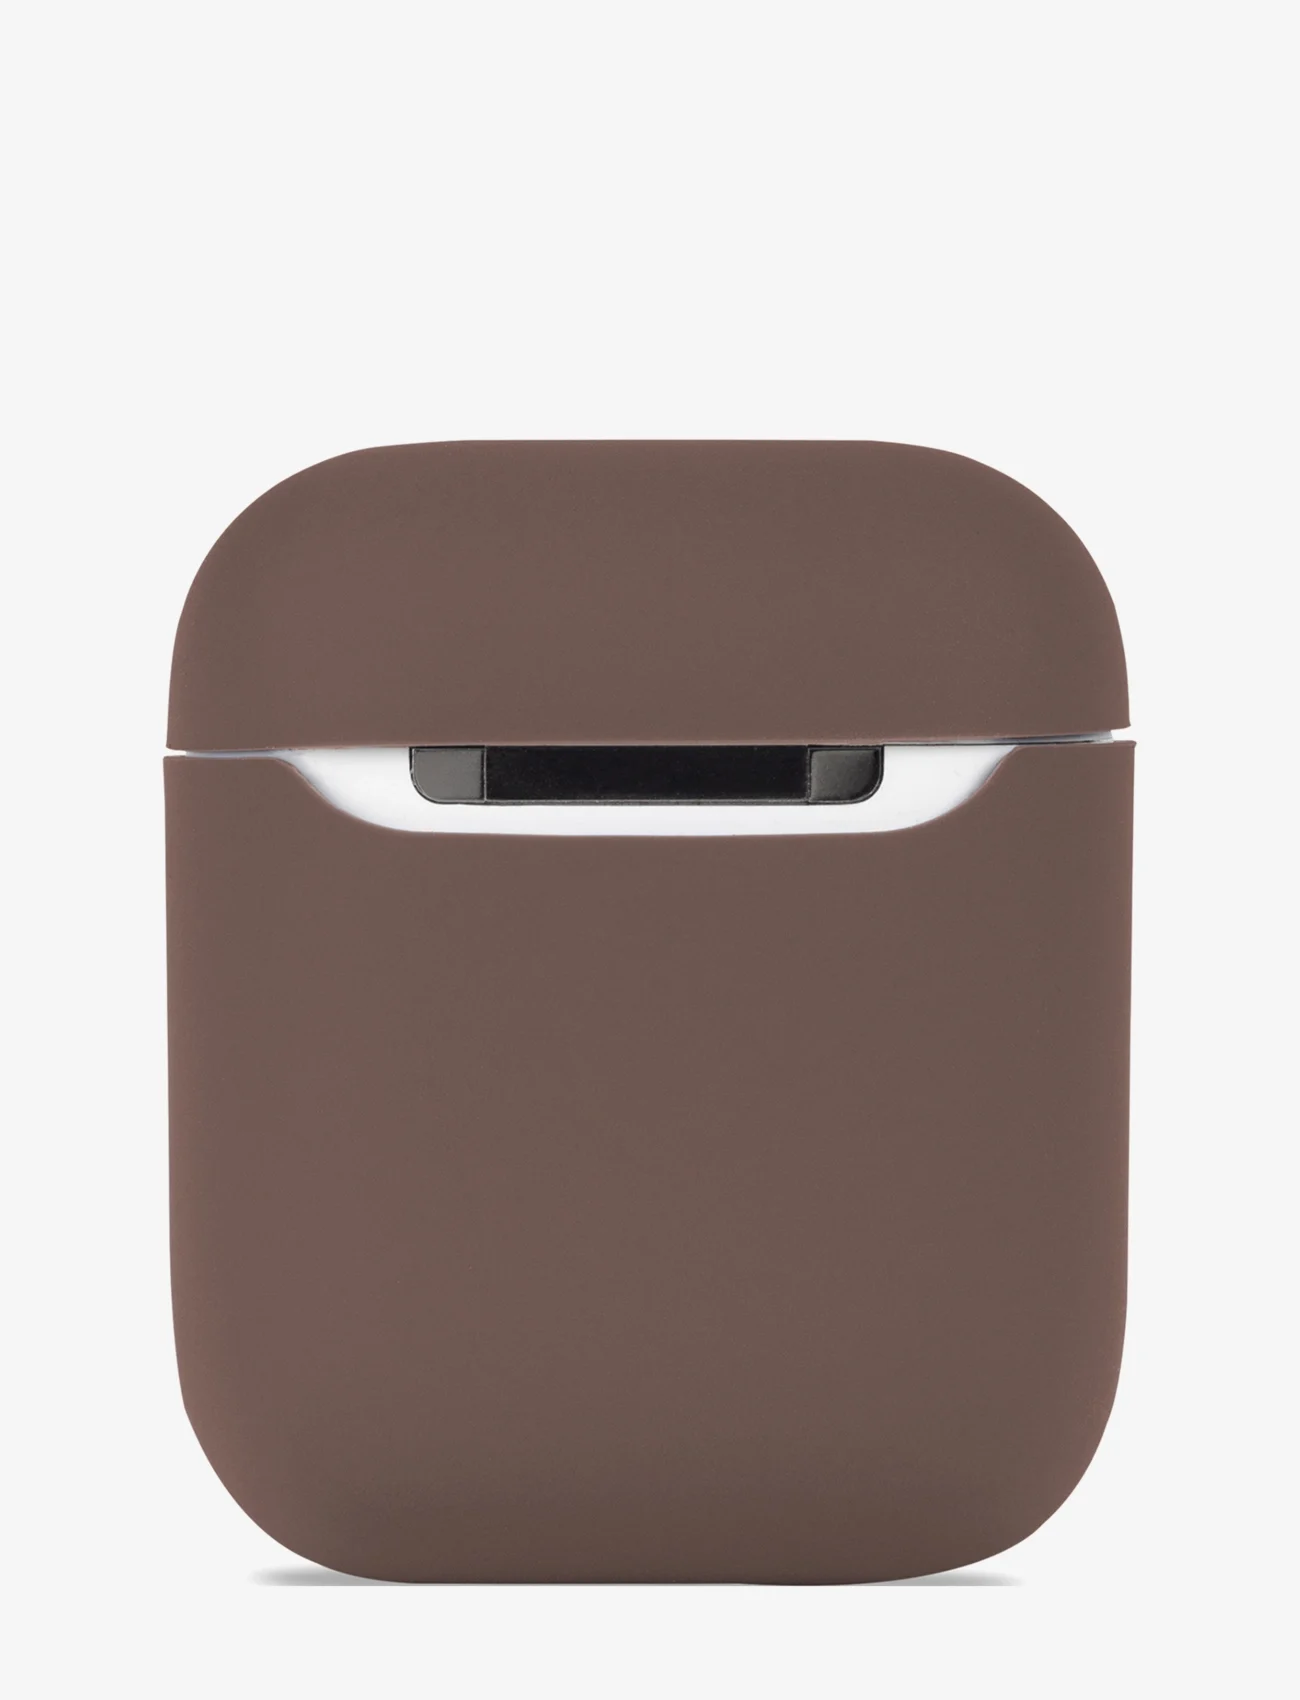 Holdit - Silicone Case AirPods 1&2 - lowest prices - nygÅrd dark brown - 1